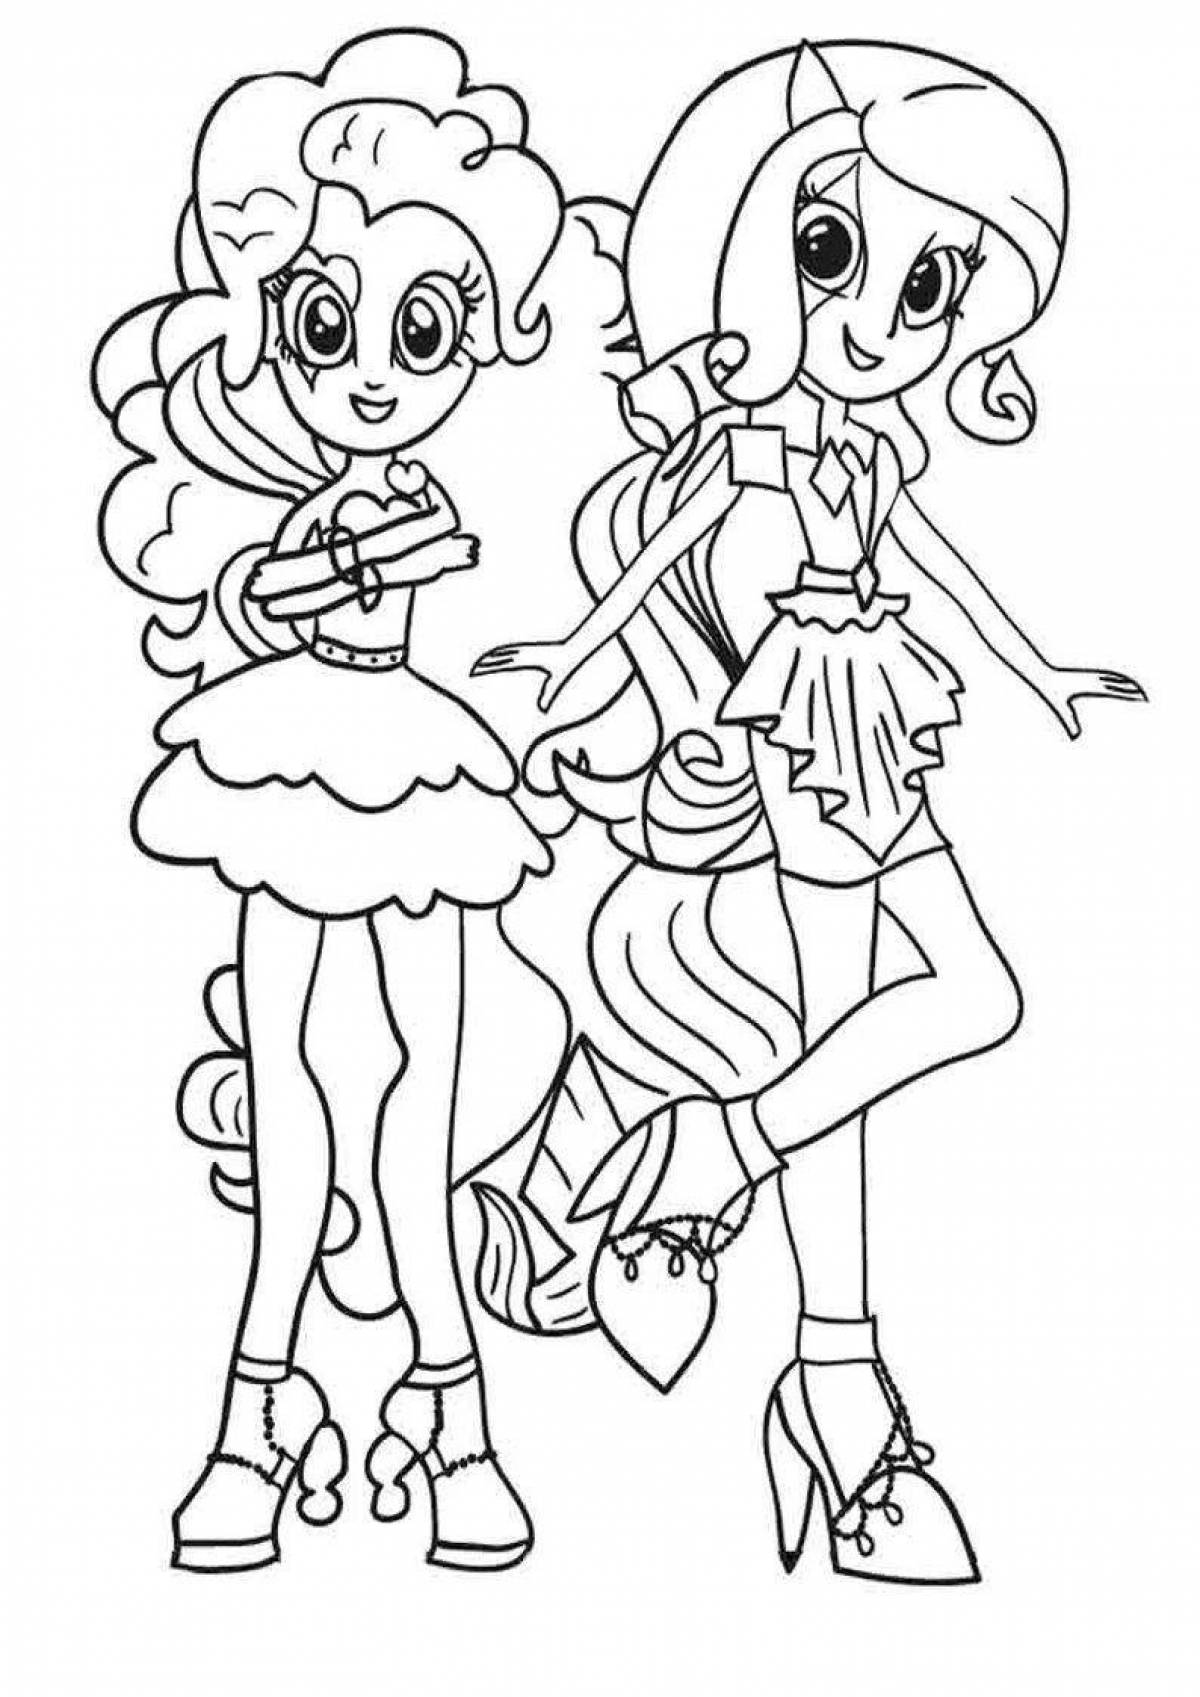 Playful pinkie pie coloring page